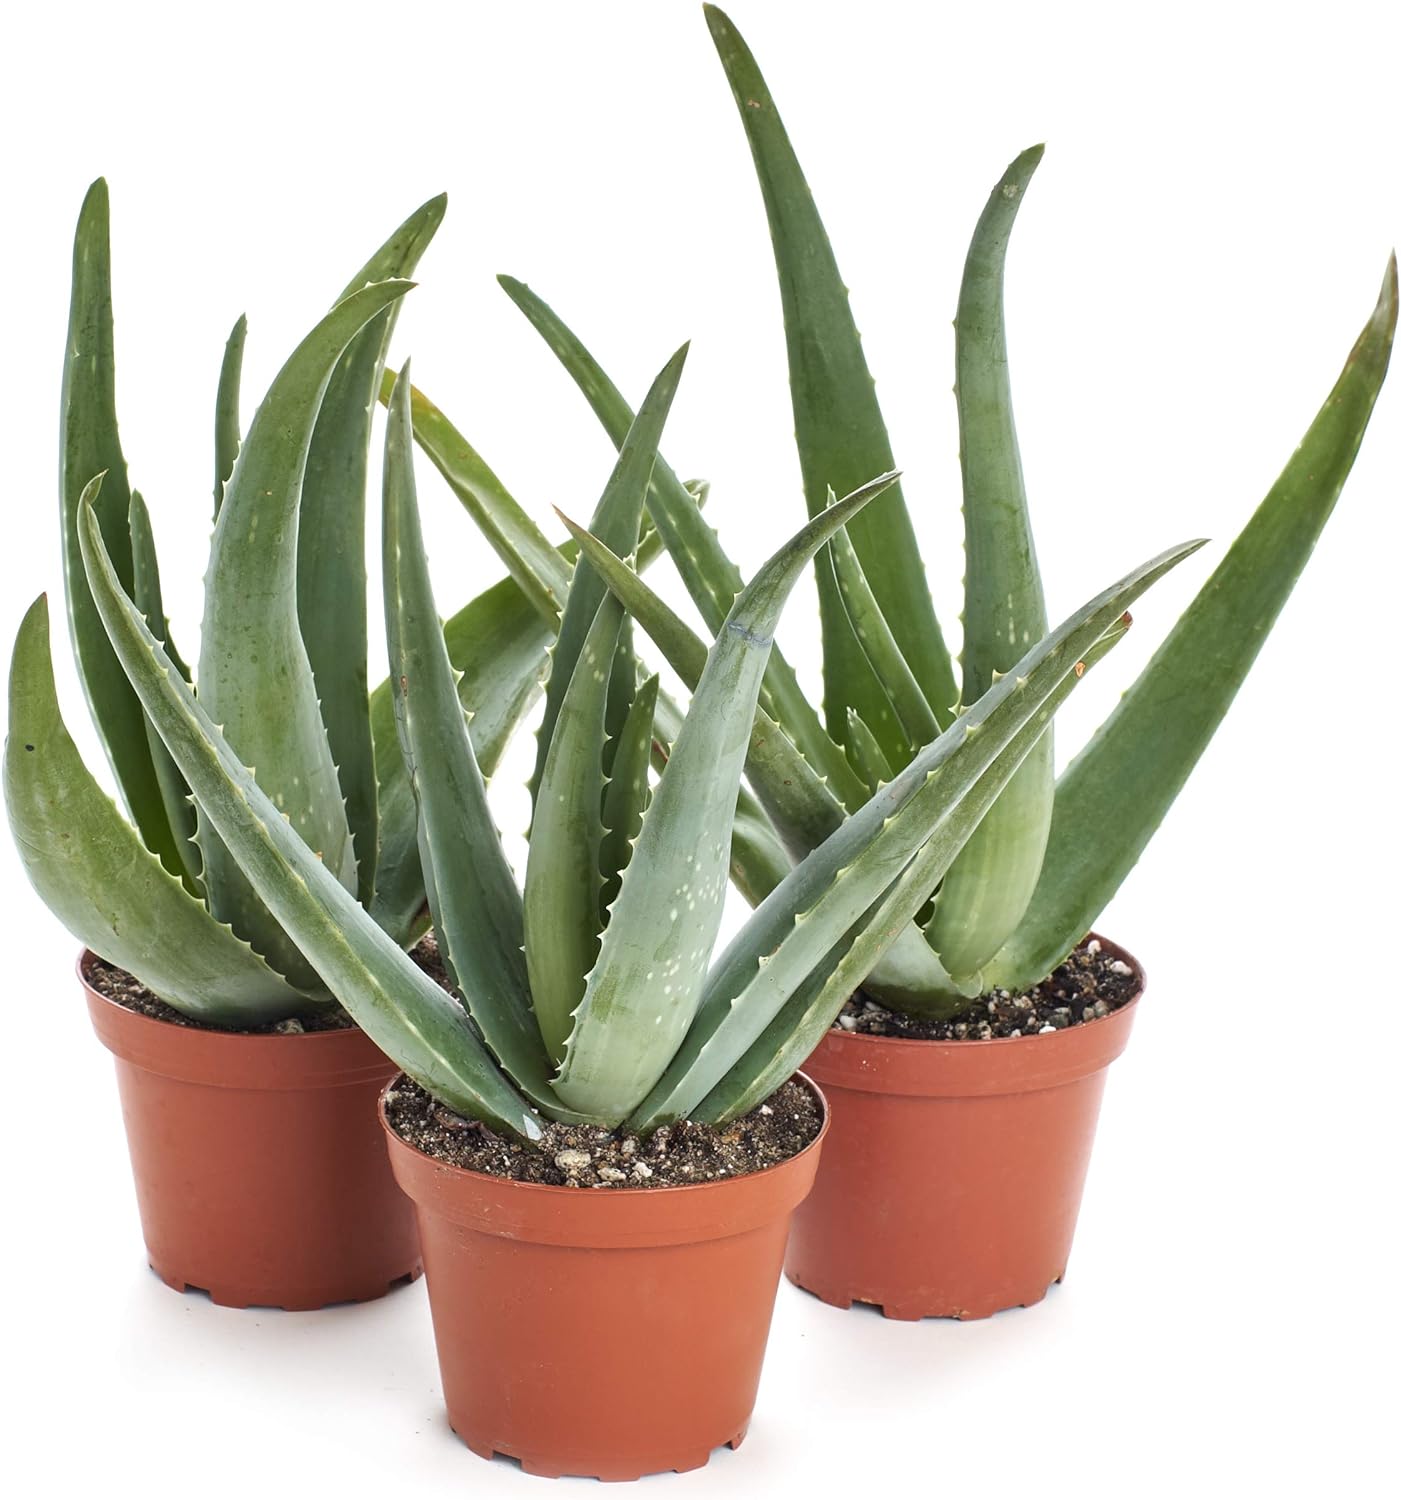 How To Care For Your Aloe Plant - www.inf-inet.com